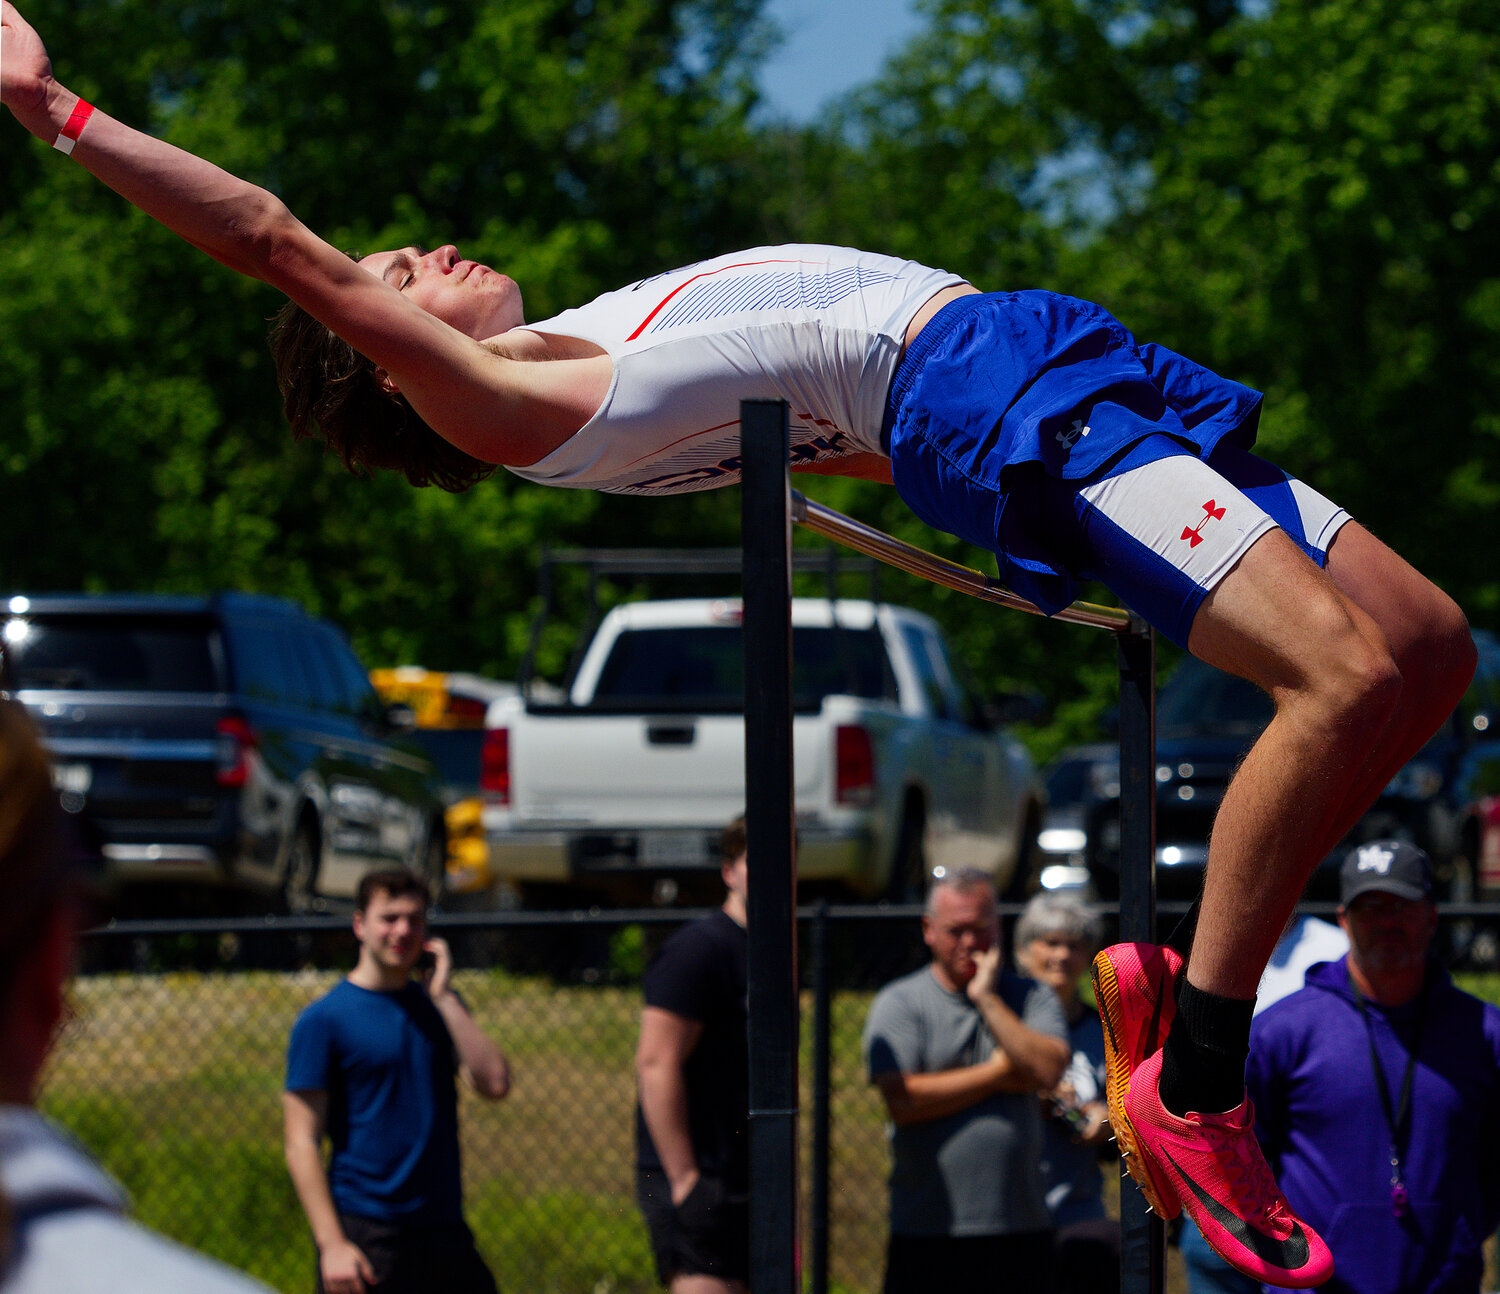 Quitman high-jumper Bryson Hobbs set a personal best and earned the gold medal with a 6'4" leap.  [see more speed and strength on display]